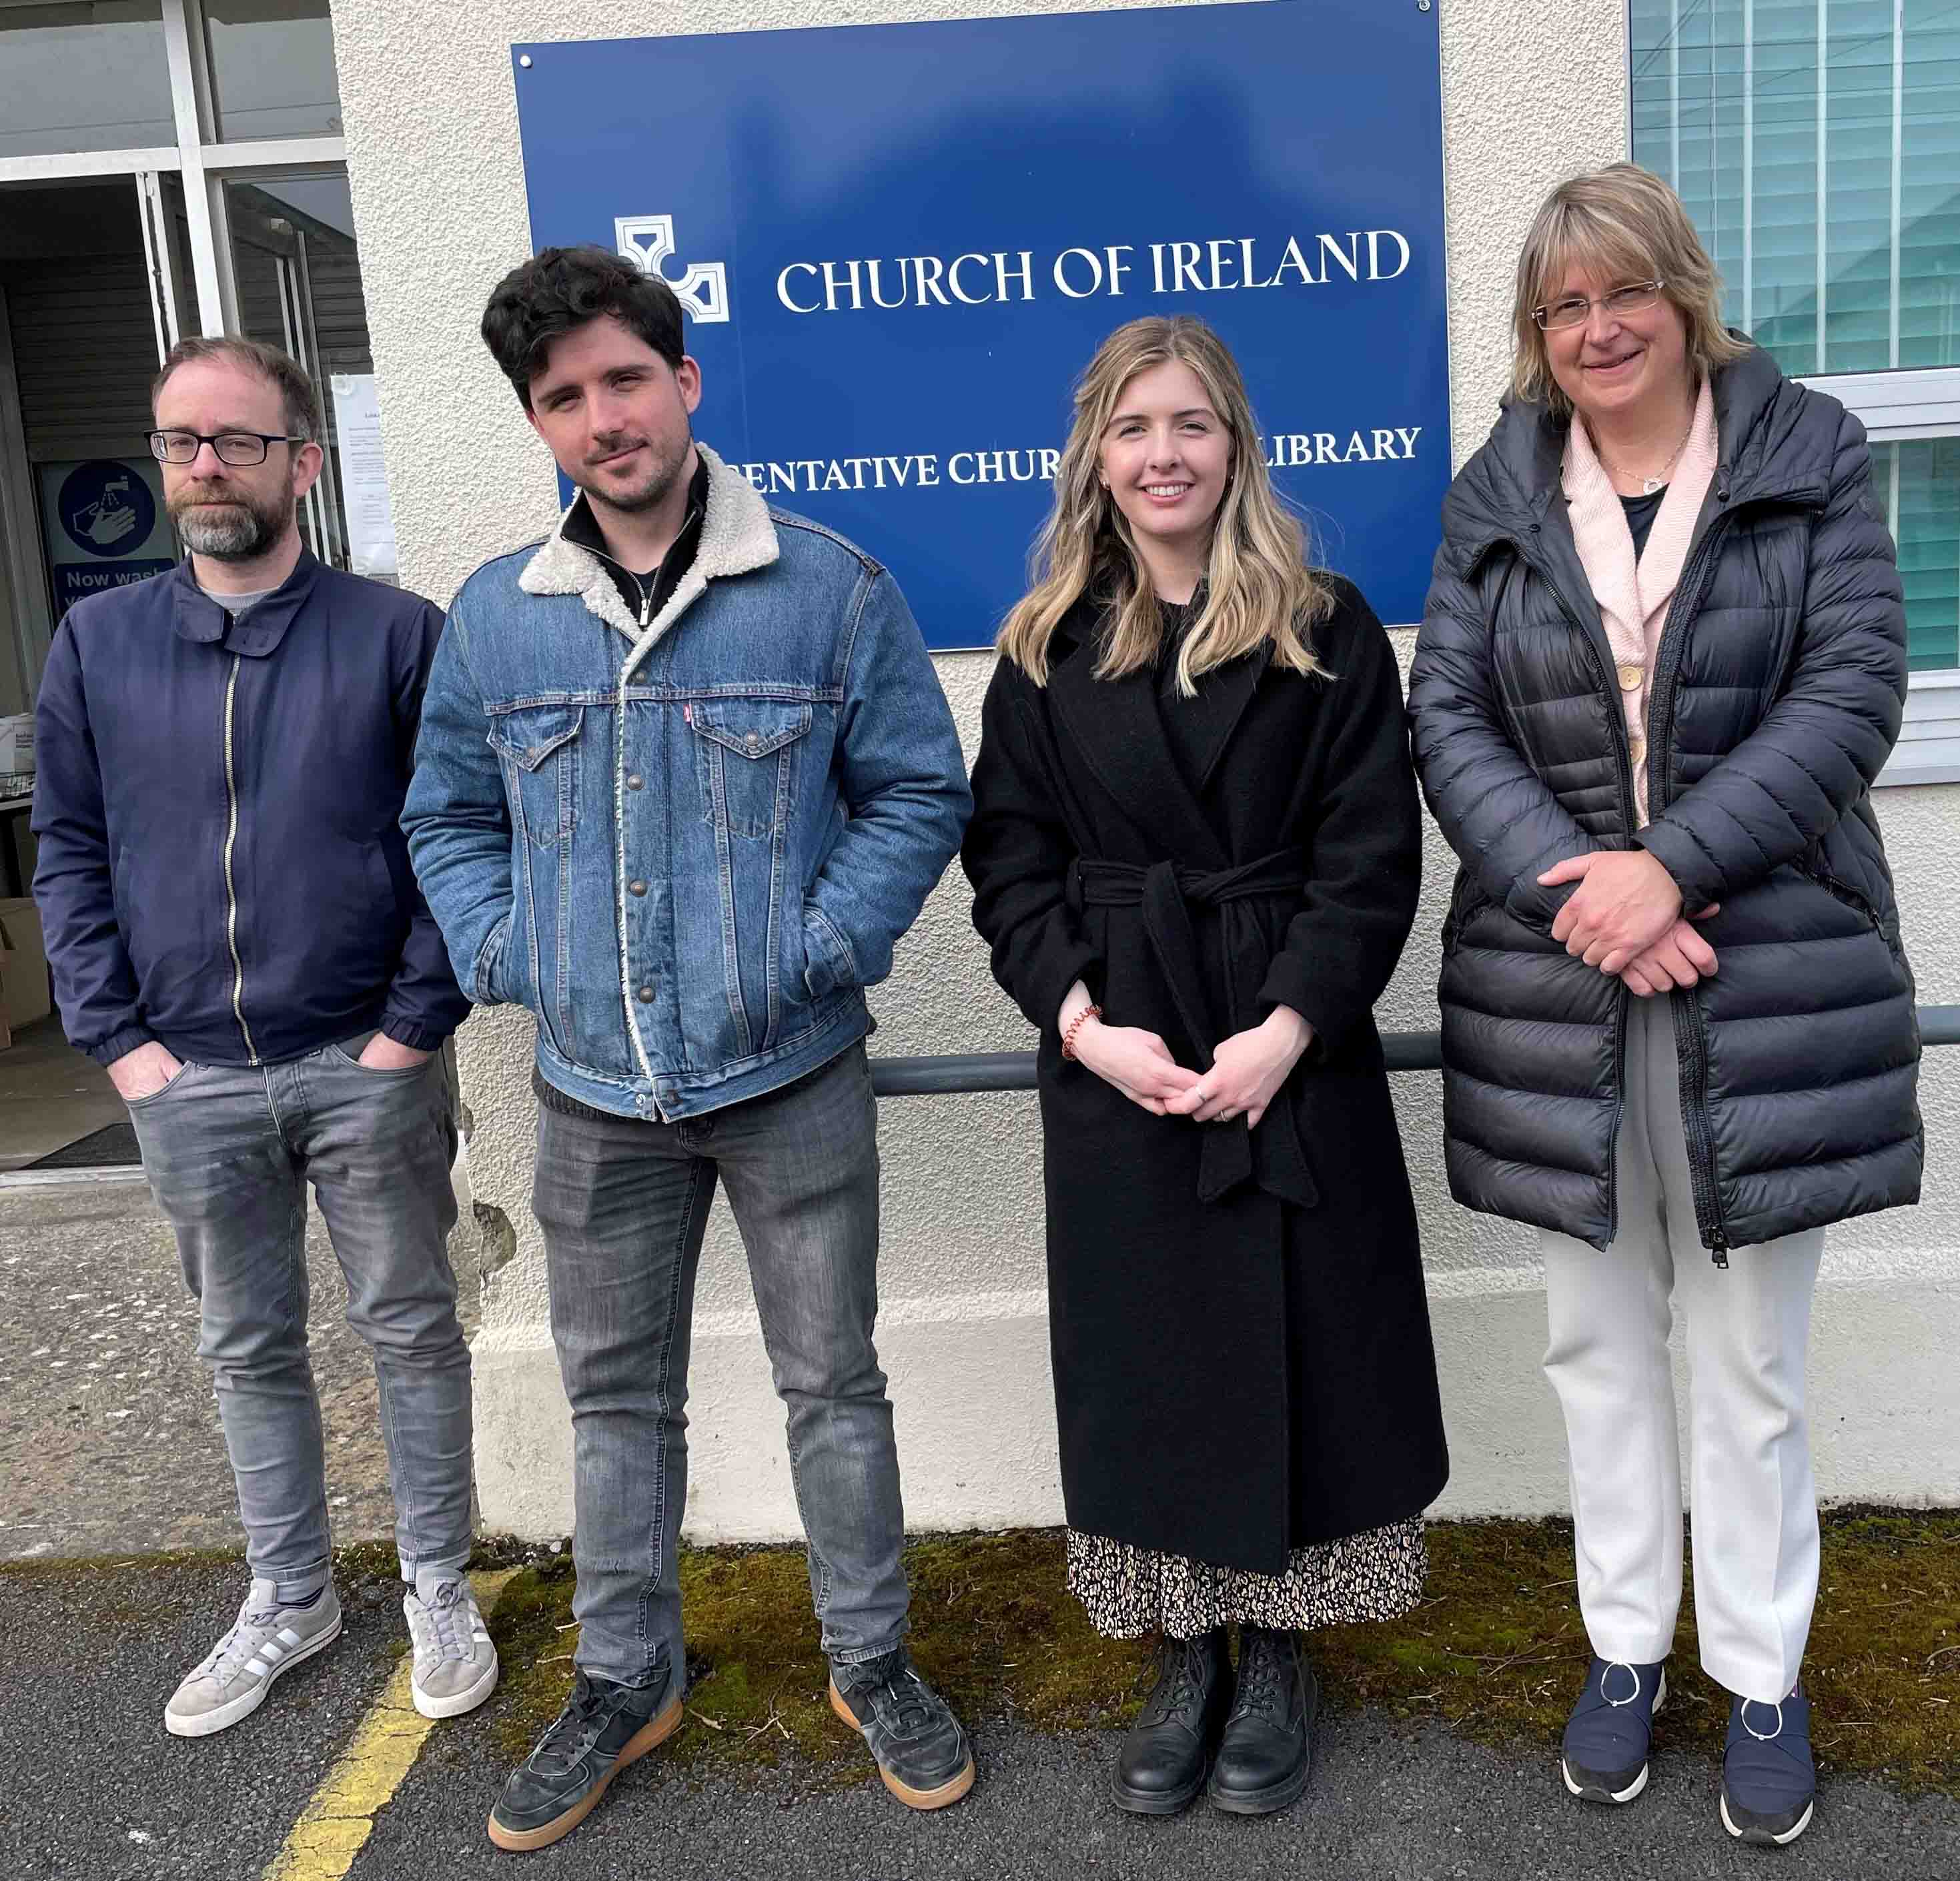 The RCB Library's staff (from left): Bryan Whelan, Assistant Librarian; Robert Gallagher, Administrator; Aisling Irwin, Assistant Archivist; and Dr Susan Hood, Librarian & Archivist.